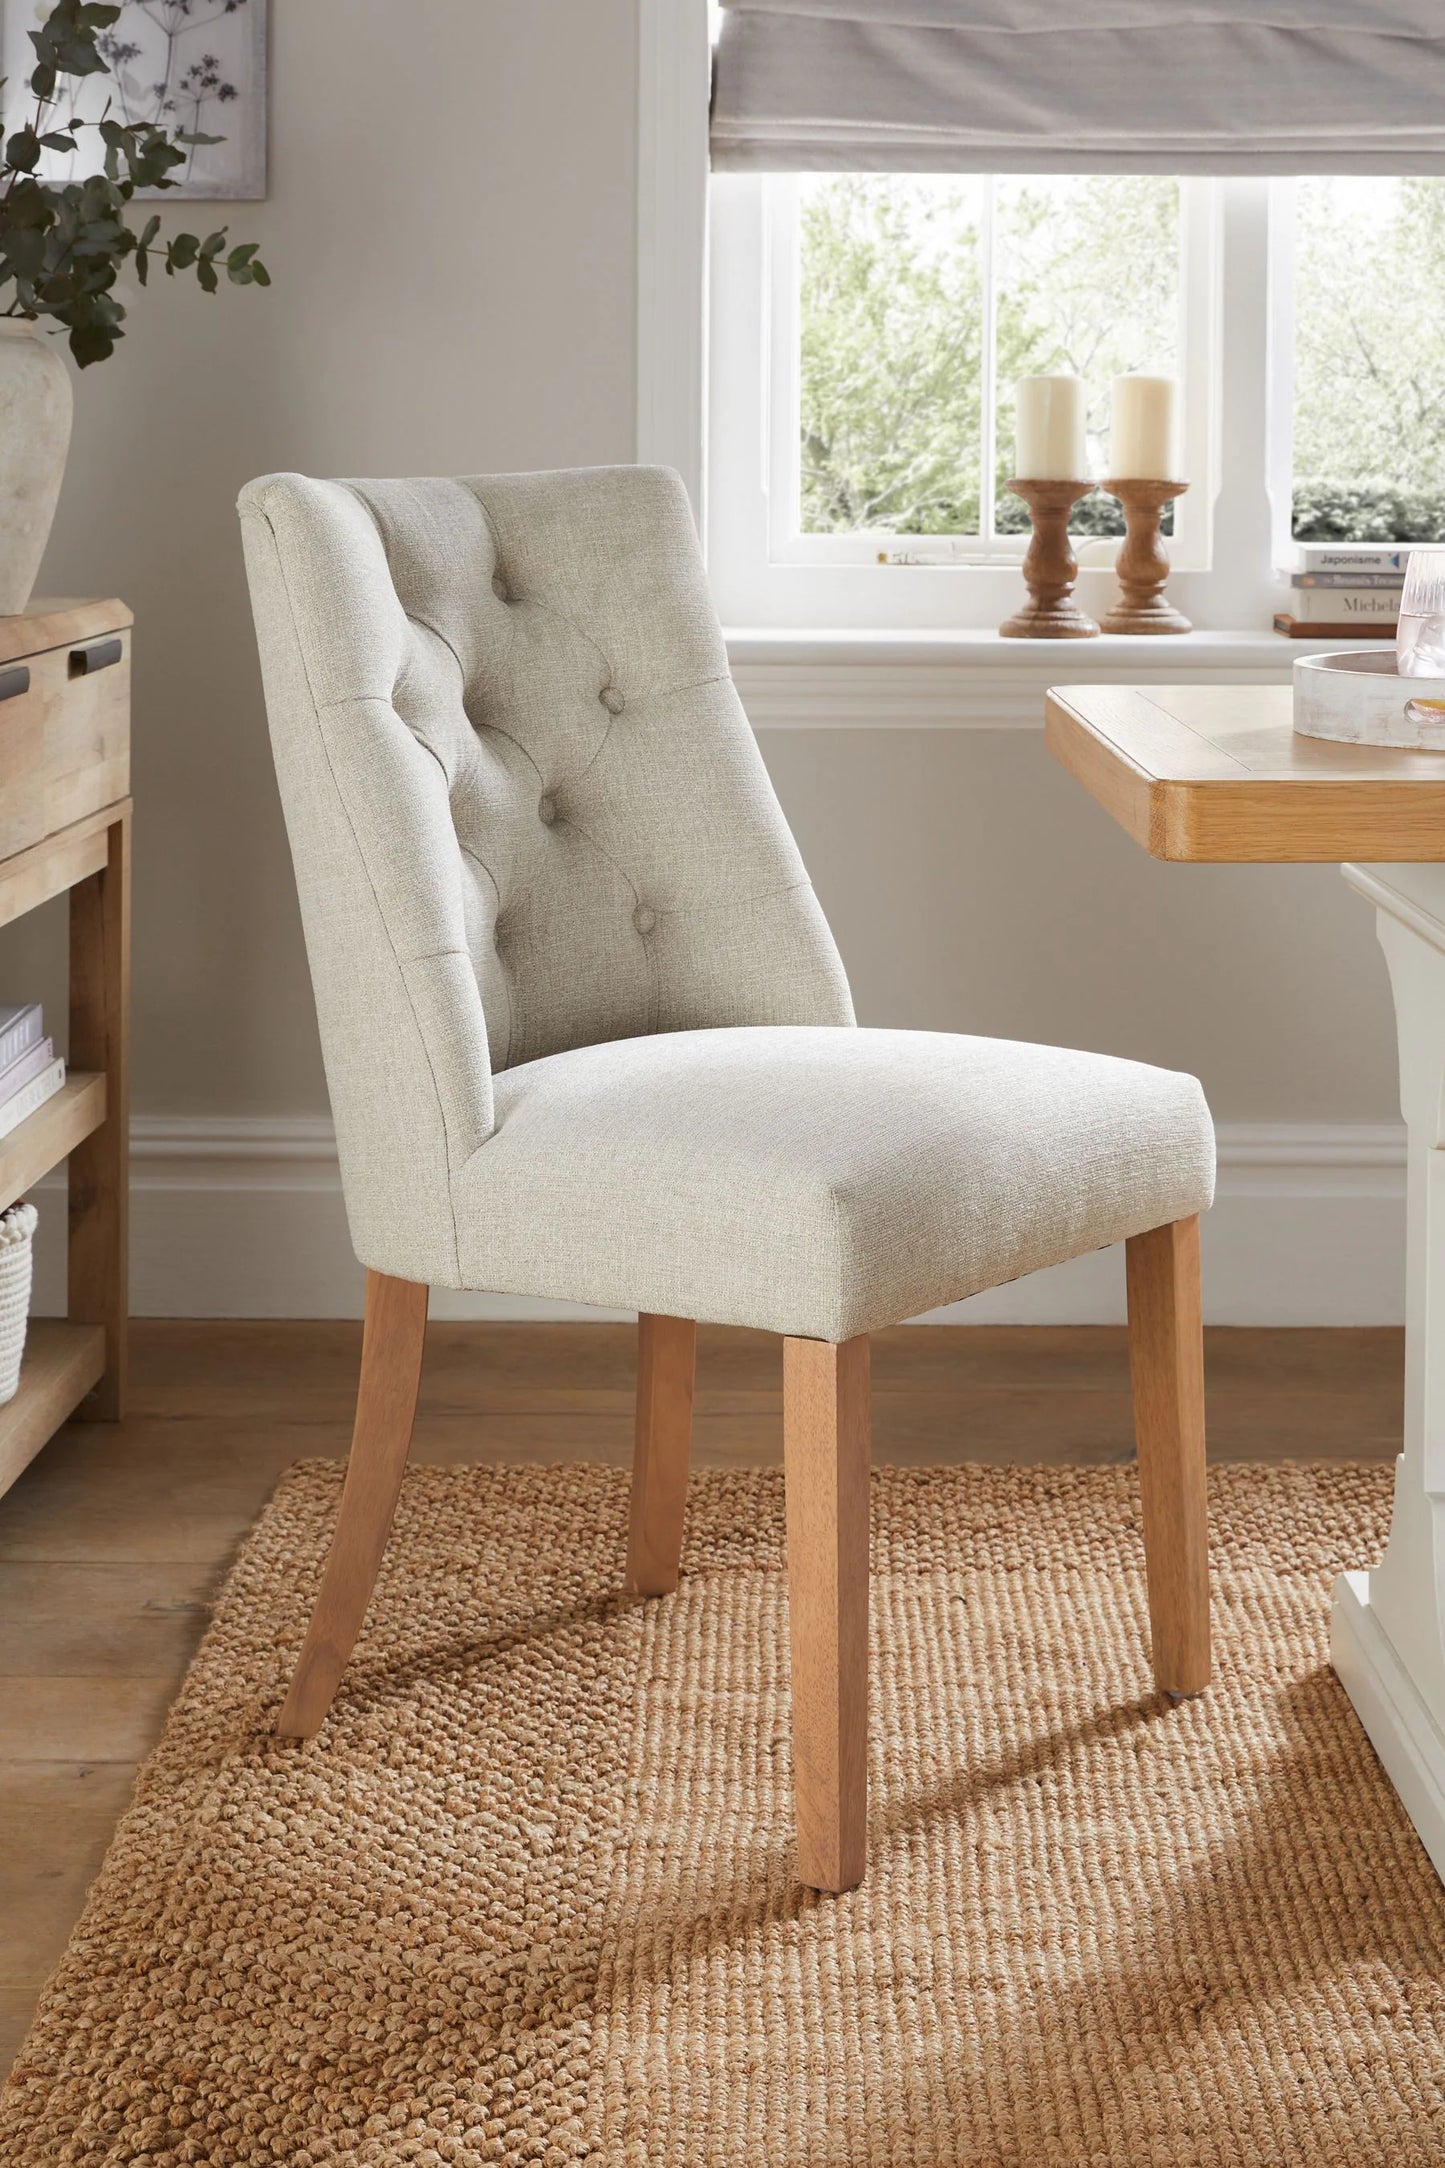 Wolton Luxe Tweedy Plain Light Natural Dining Chairs - Set of 2